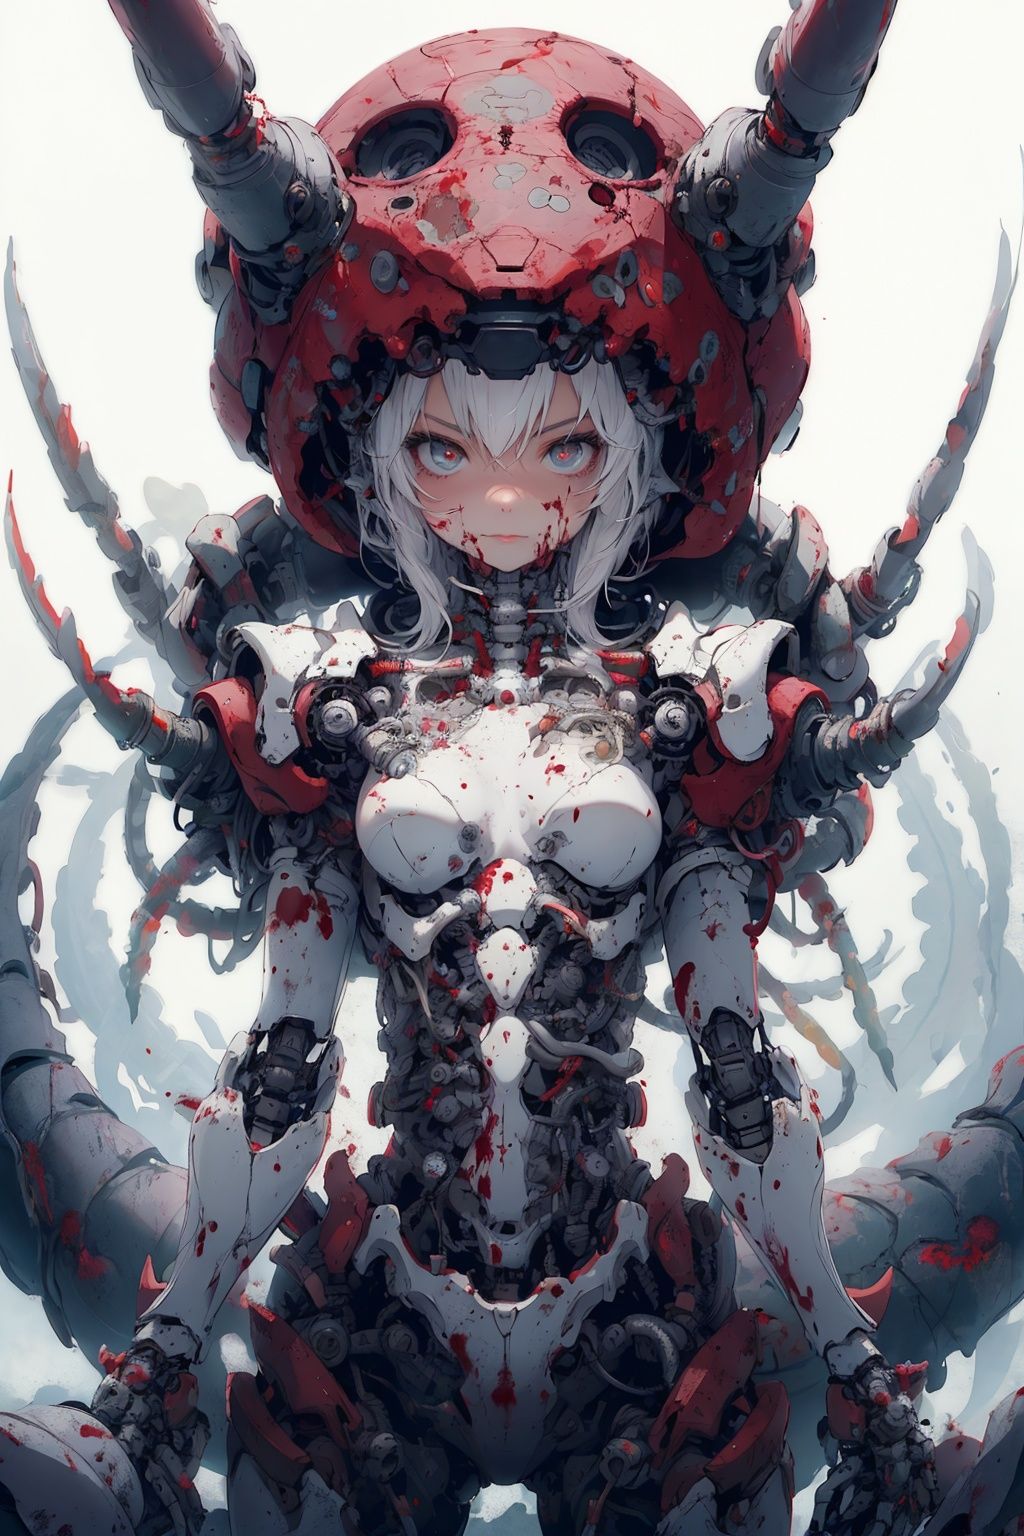 Masterpiece-level best_quality, concept artwork, a lonely solo girl, a necromancer character from the game "League of Legends", with snow-white hair, centipede-like tentacles wrapped around, blood flowing from the body, wearing PVC shell, mechanical exoskeleton device equipment, creating avant-garde and terrifying visual effect.